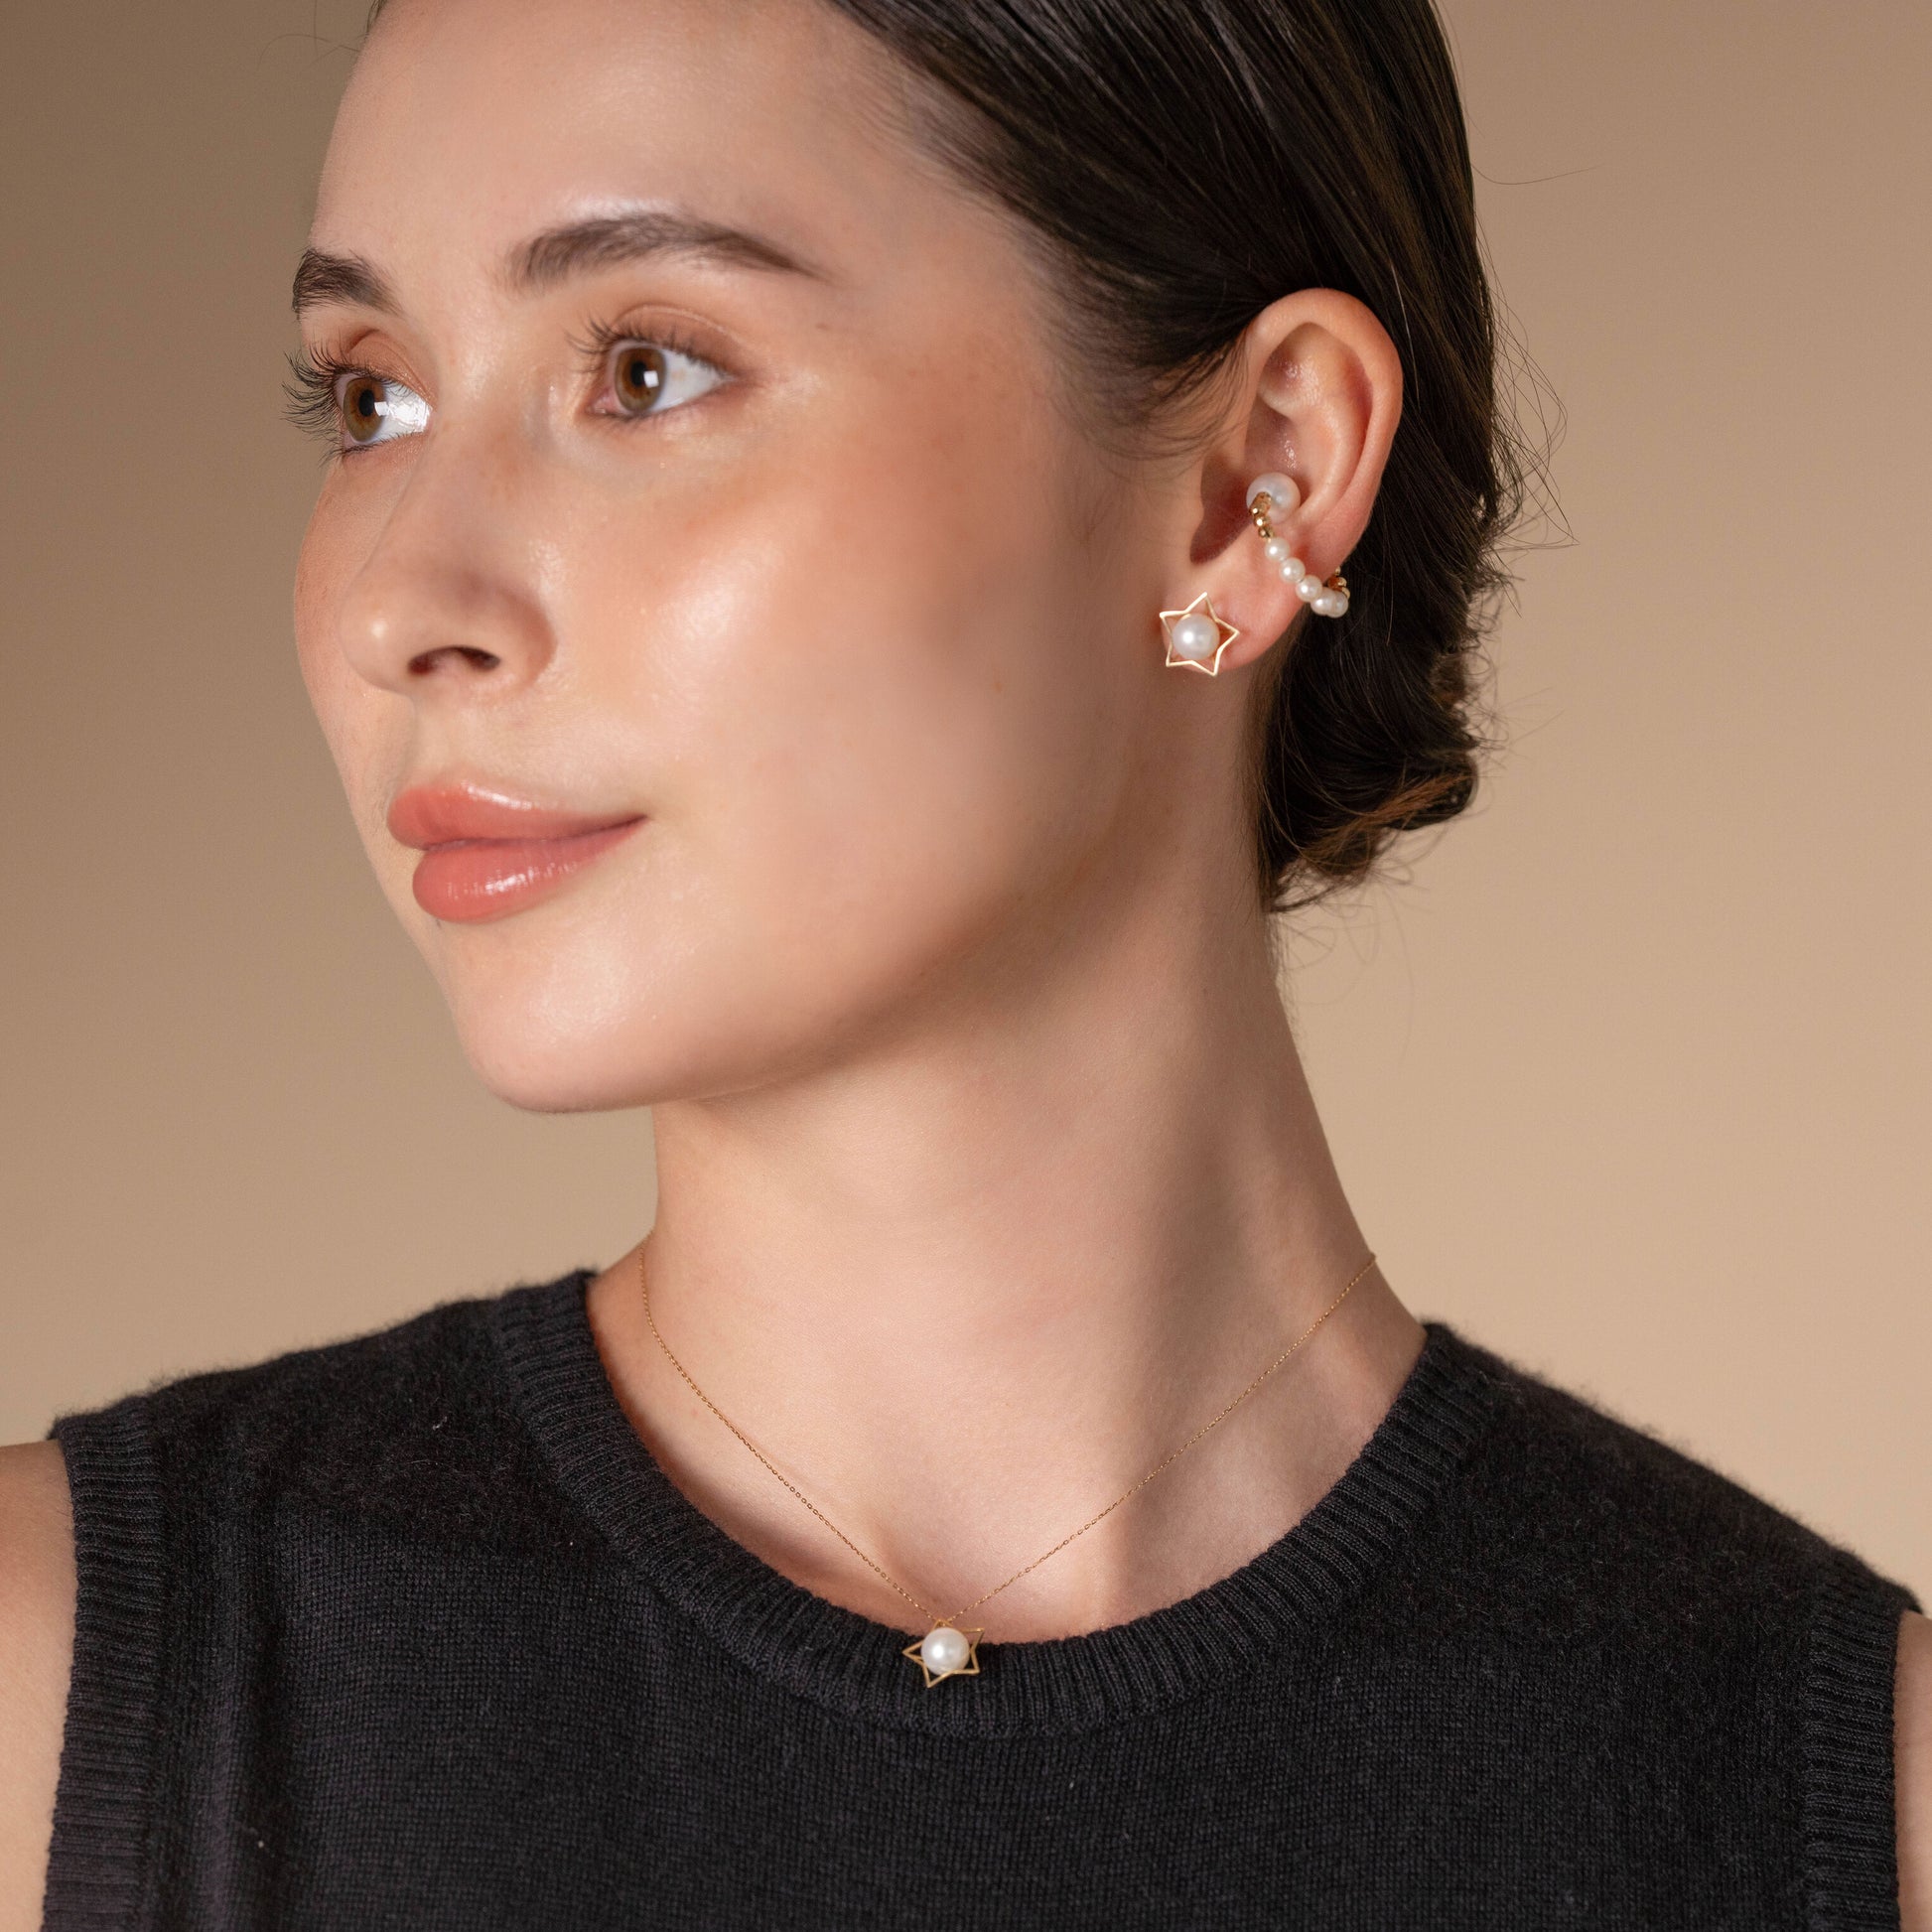 Stylish woman in black top and Star Gold Pearl Piercing earrings exudes elegance.